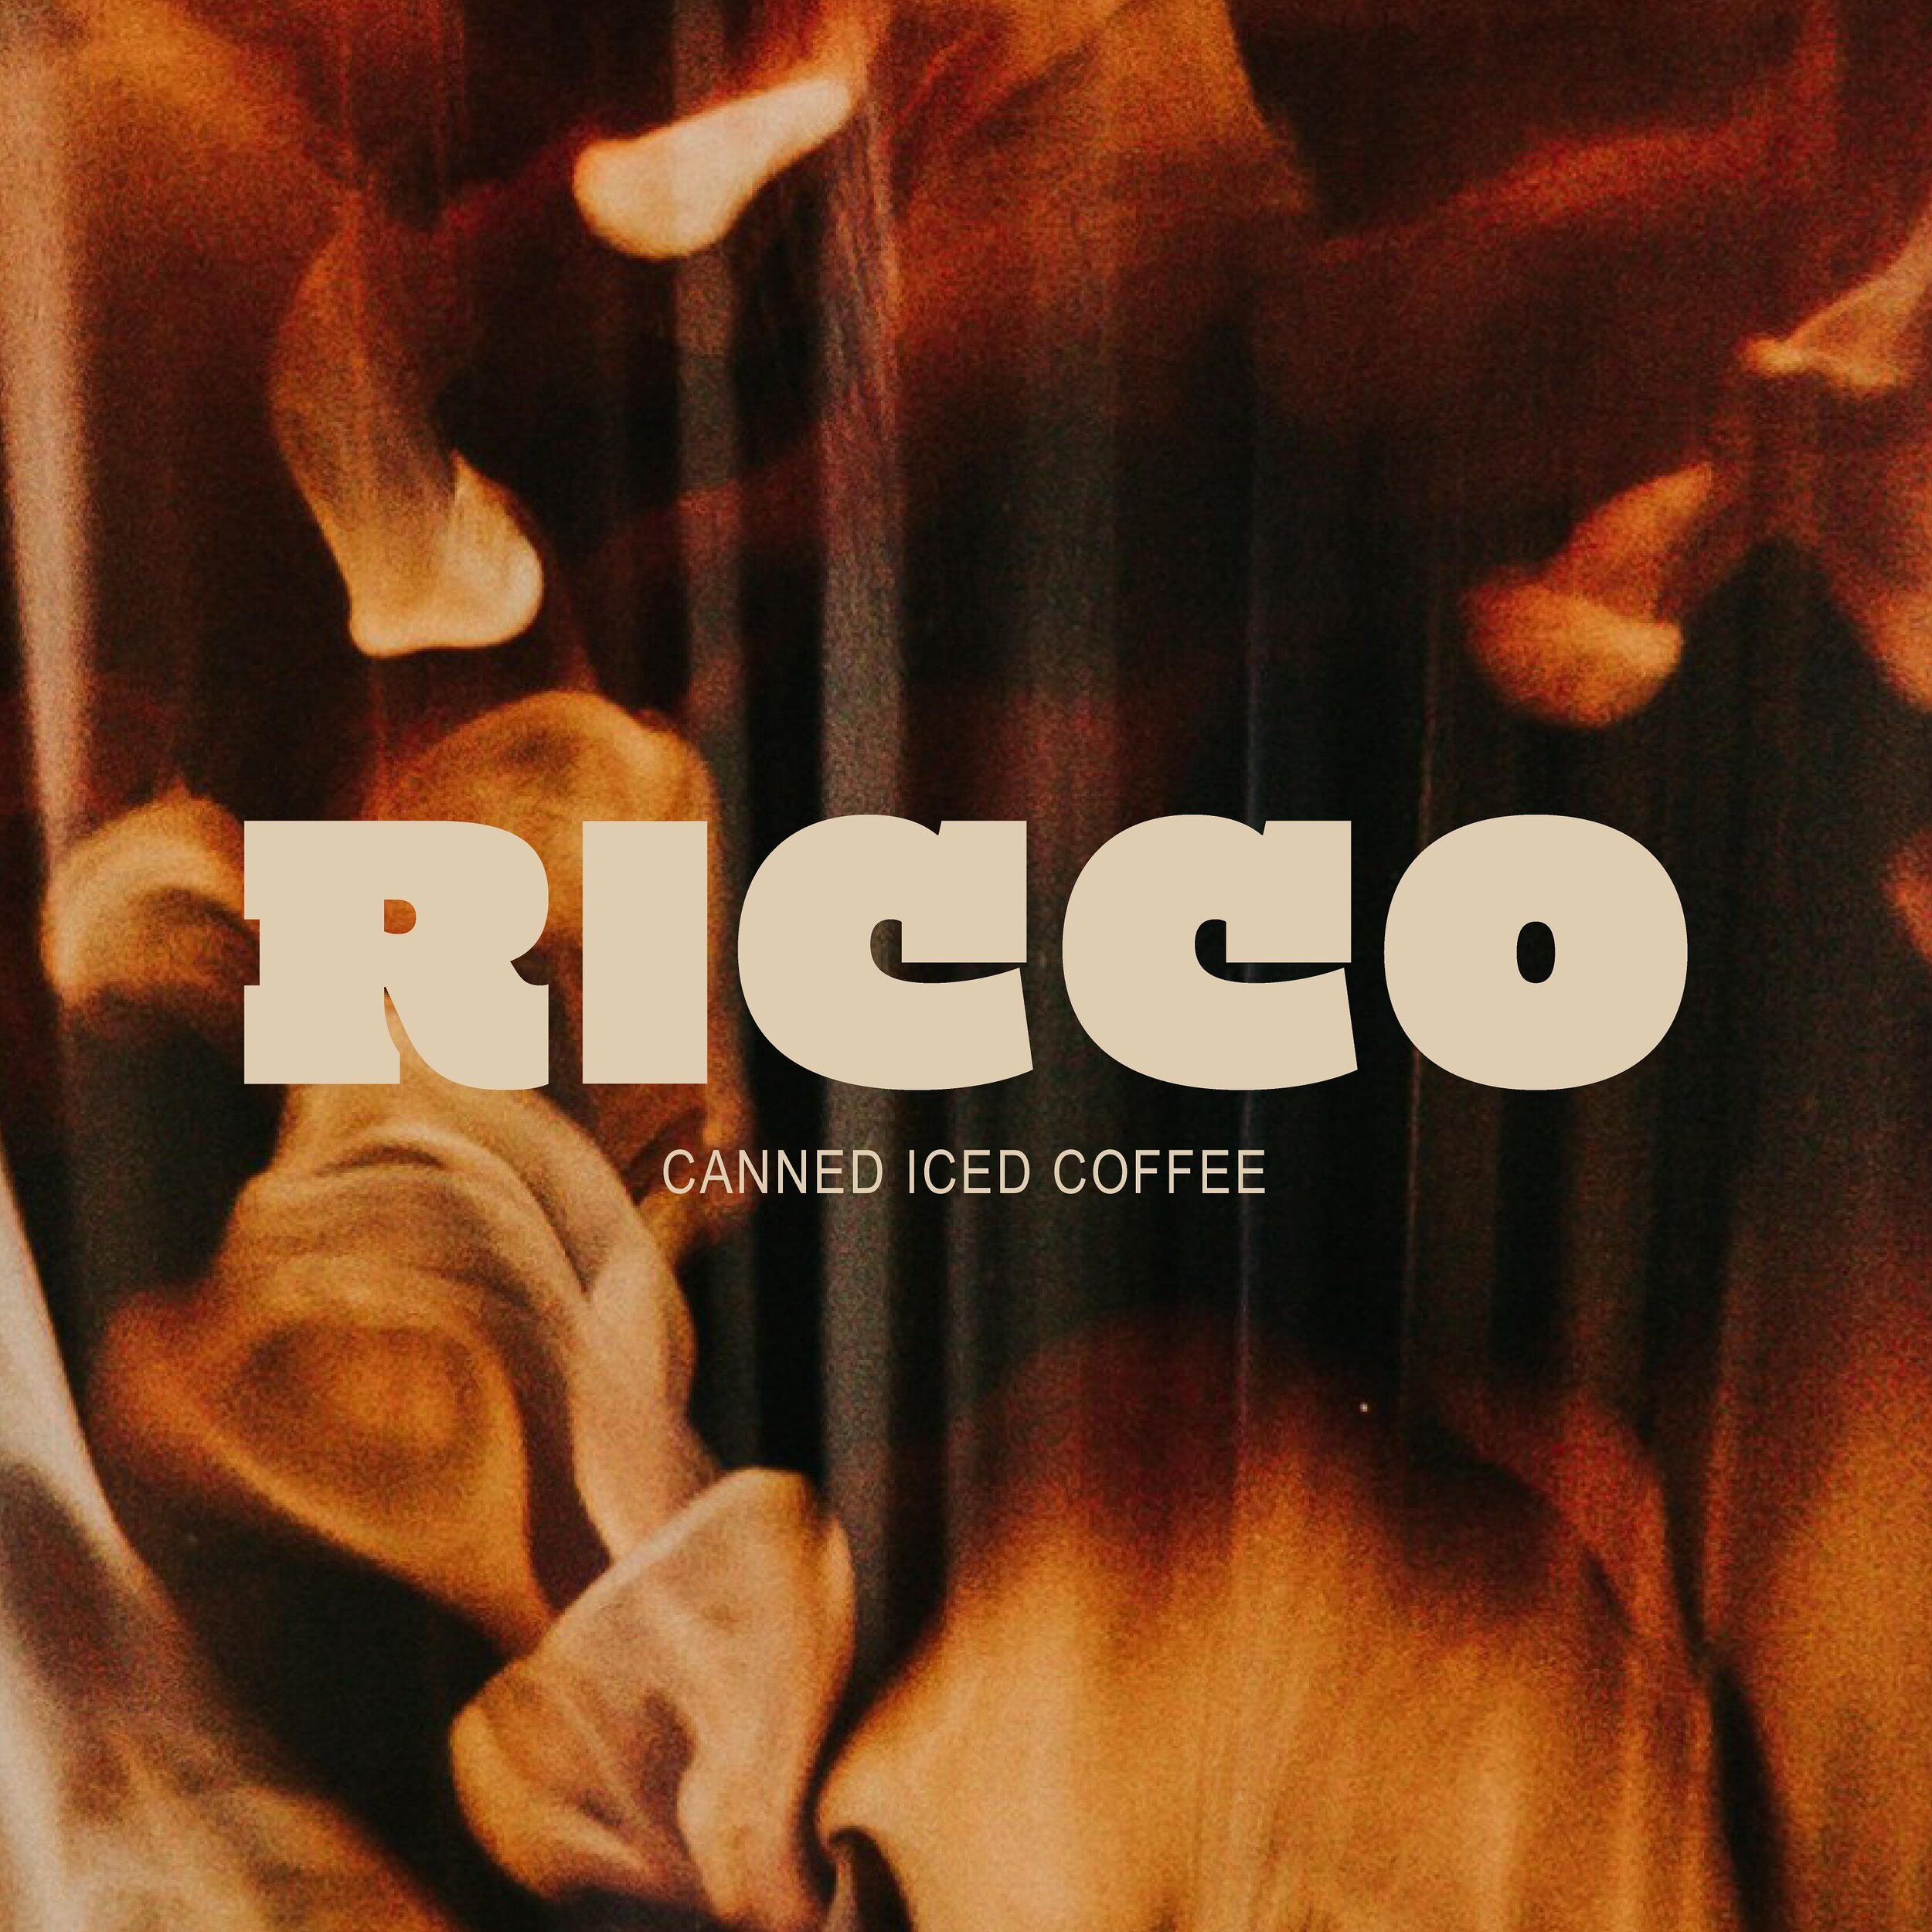 Ricco [part one] &mdash;

I think I have a love for designing anything to do with coffee at this point, especially when it&rsquo;s iced coffee ☕️

More on this brief to come! 

@designerbriefs